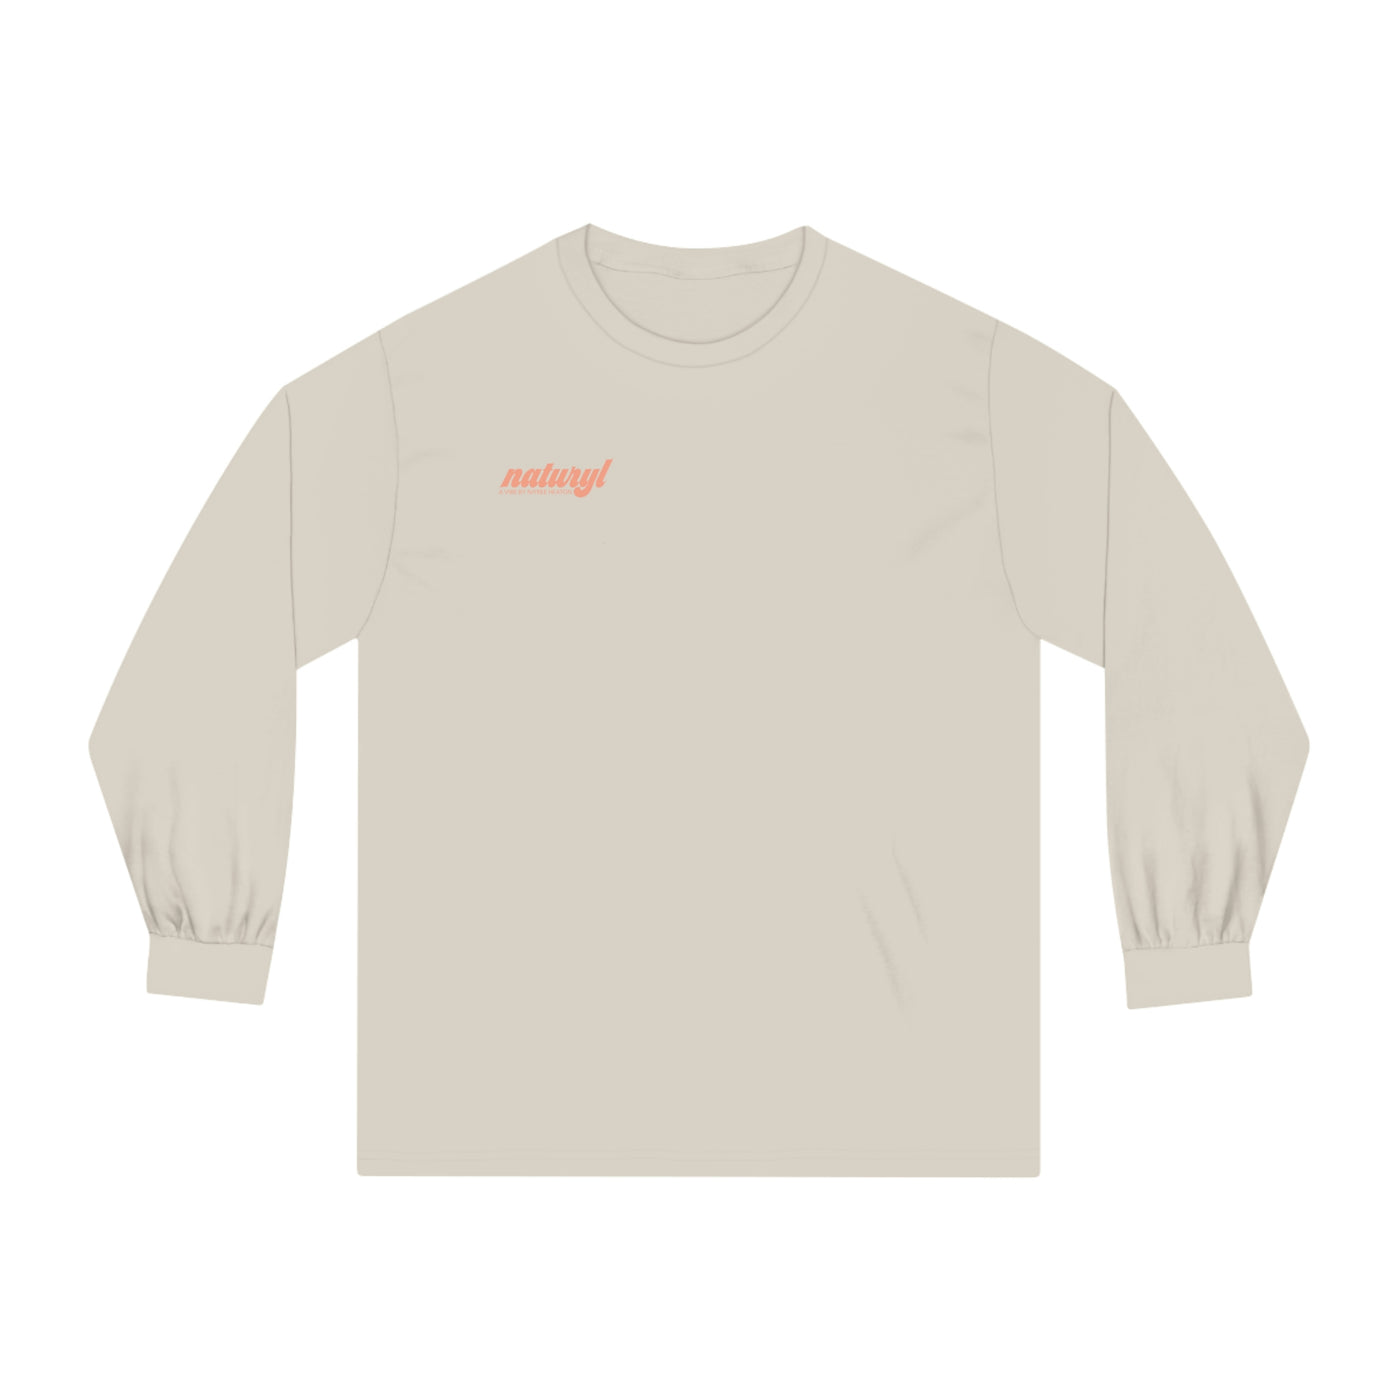 THE "YOU ARE HERE" LONG SLEEVE TEE